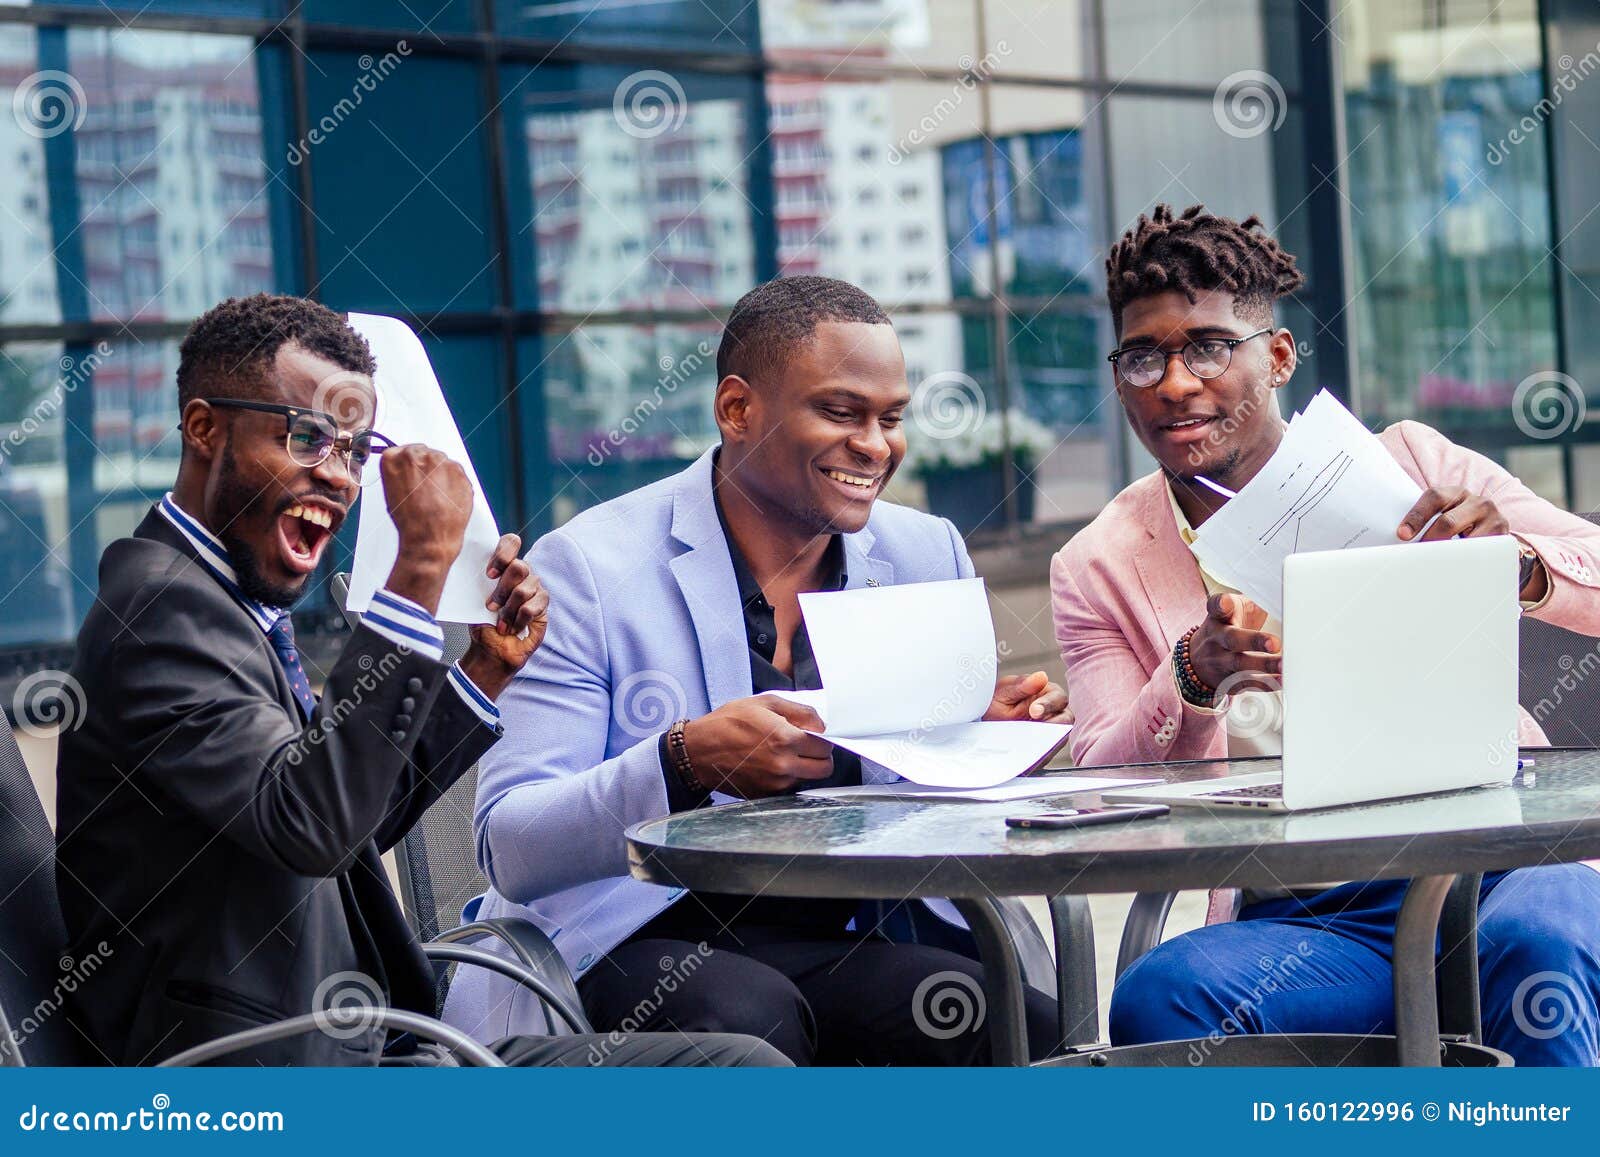 a group of their three successful african american businessmen in a stylish suit sit at the table and work with a laptop